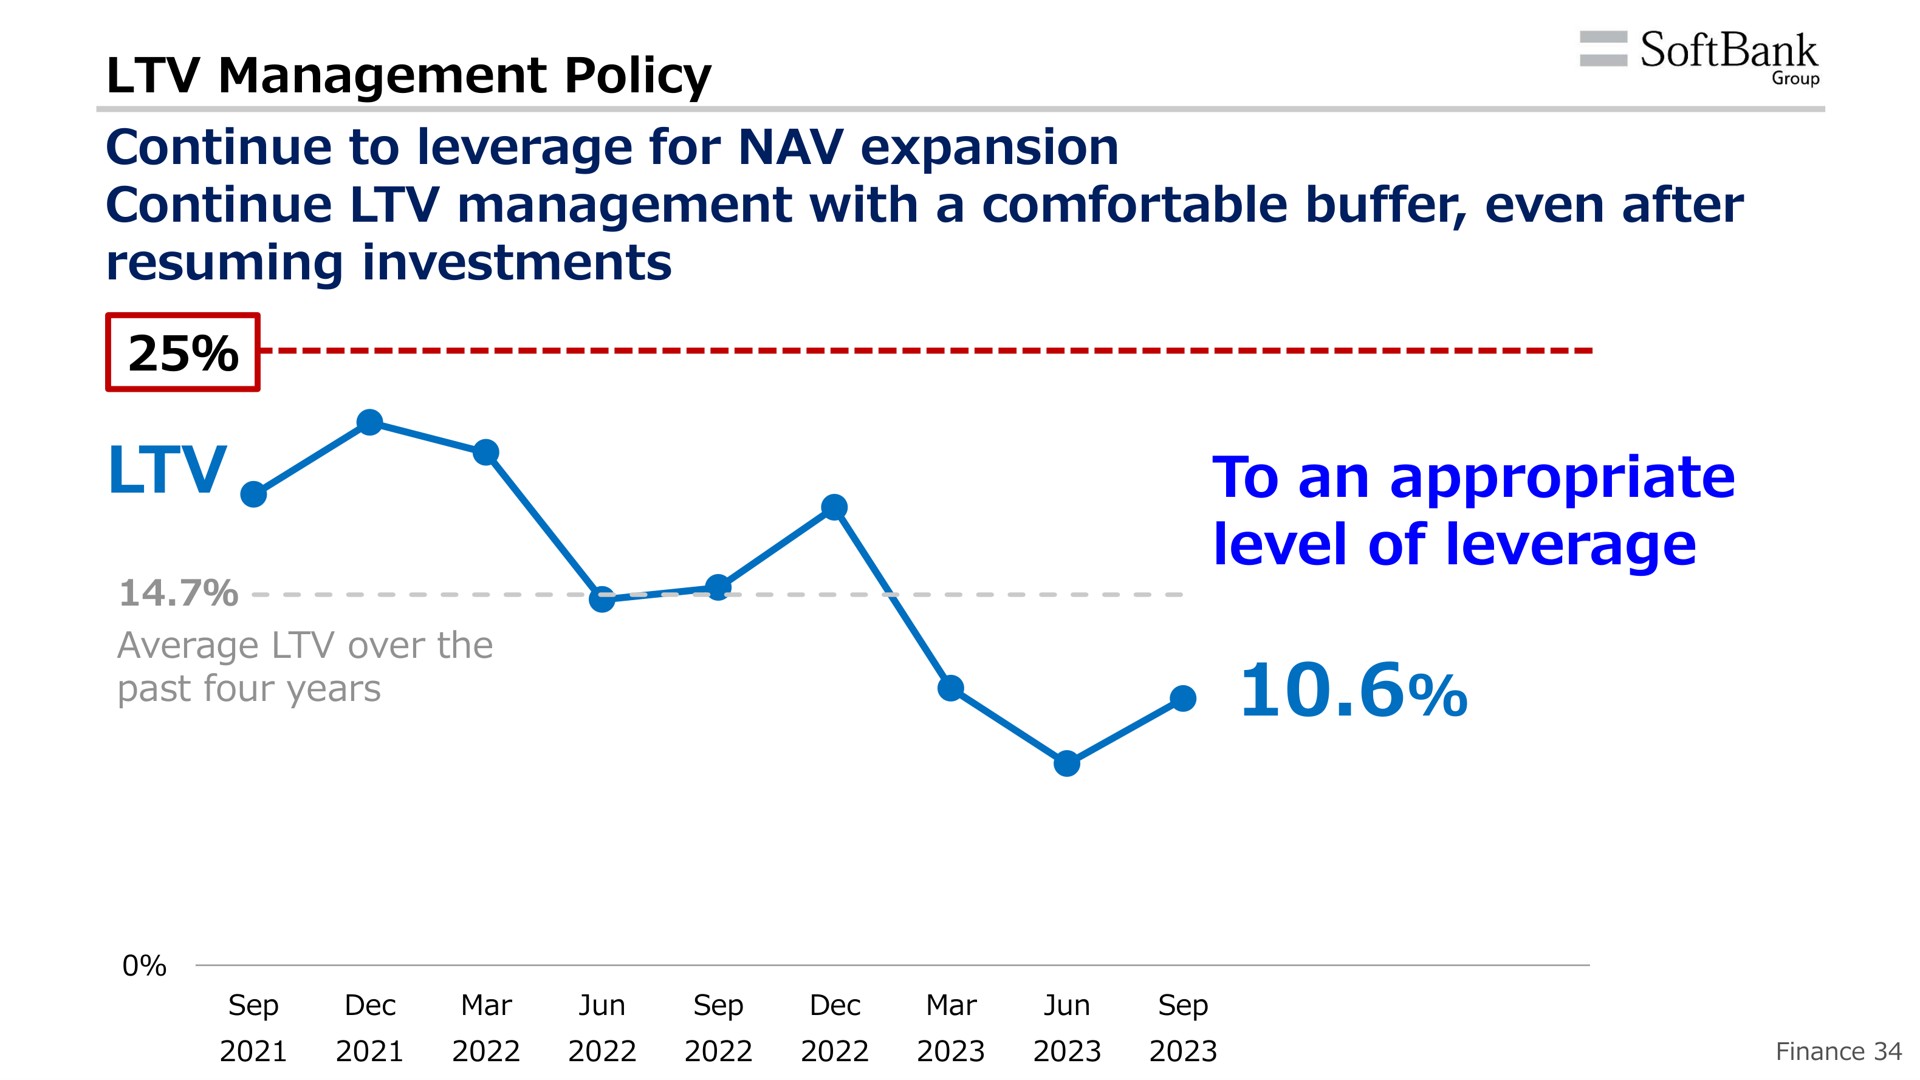 management policy continue to leverage for expansion continue management with a comfortable buffer even after resuming investments to an appropriate level of leverage | SoftBank